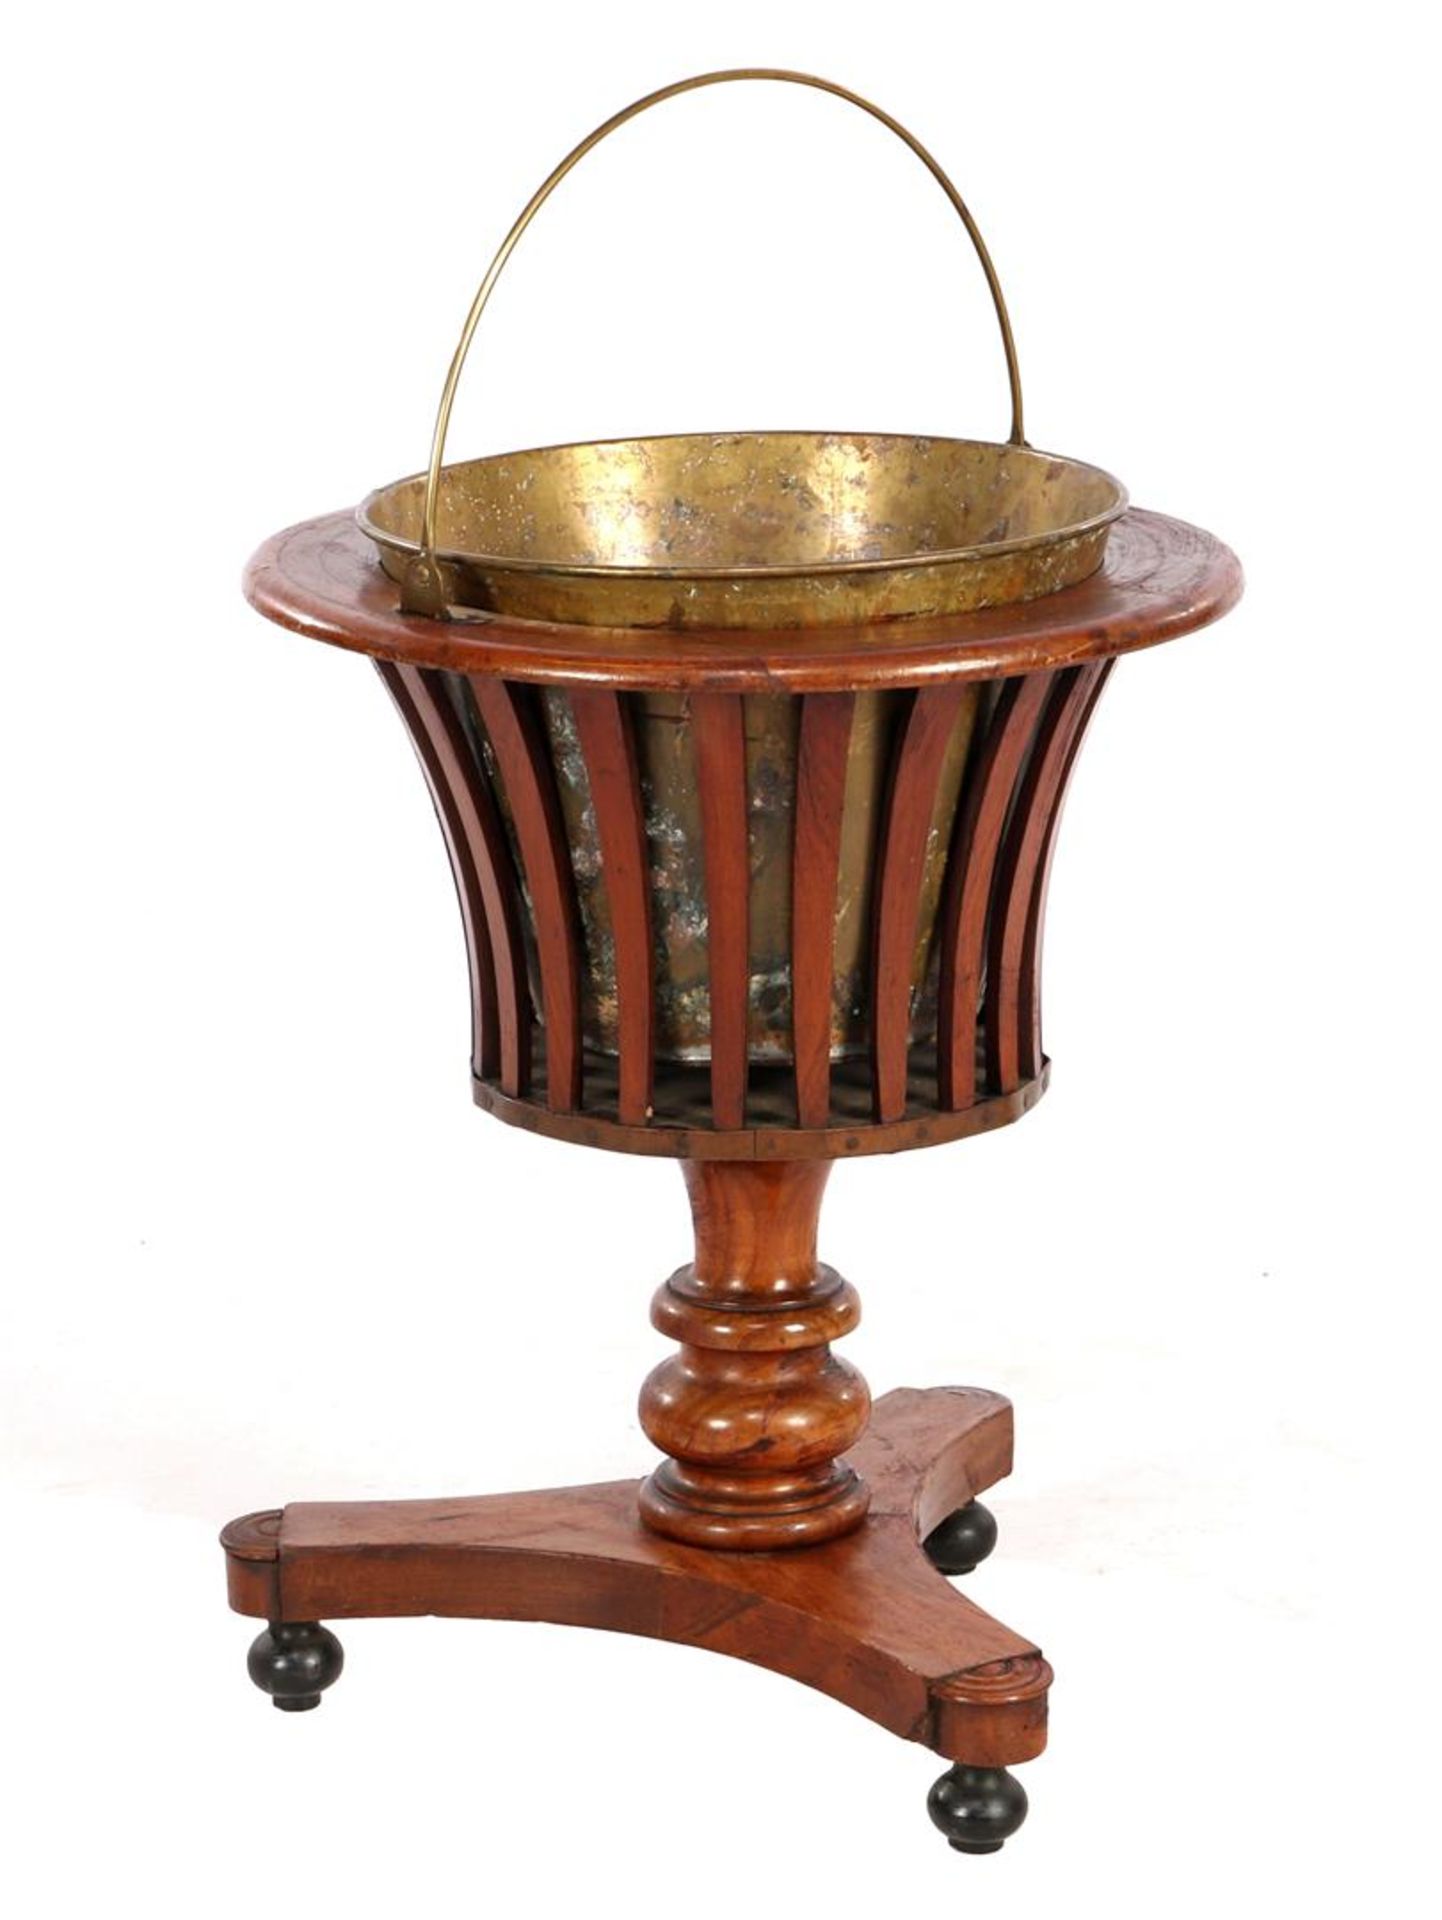 Walnut slatted tea stove with copper inner container